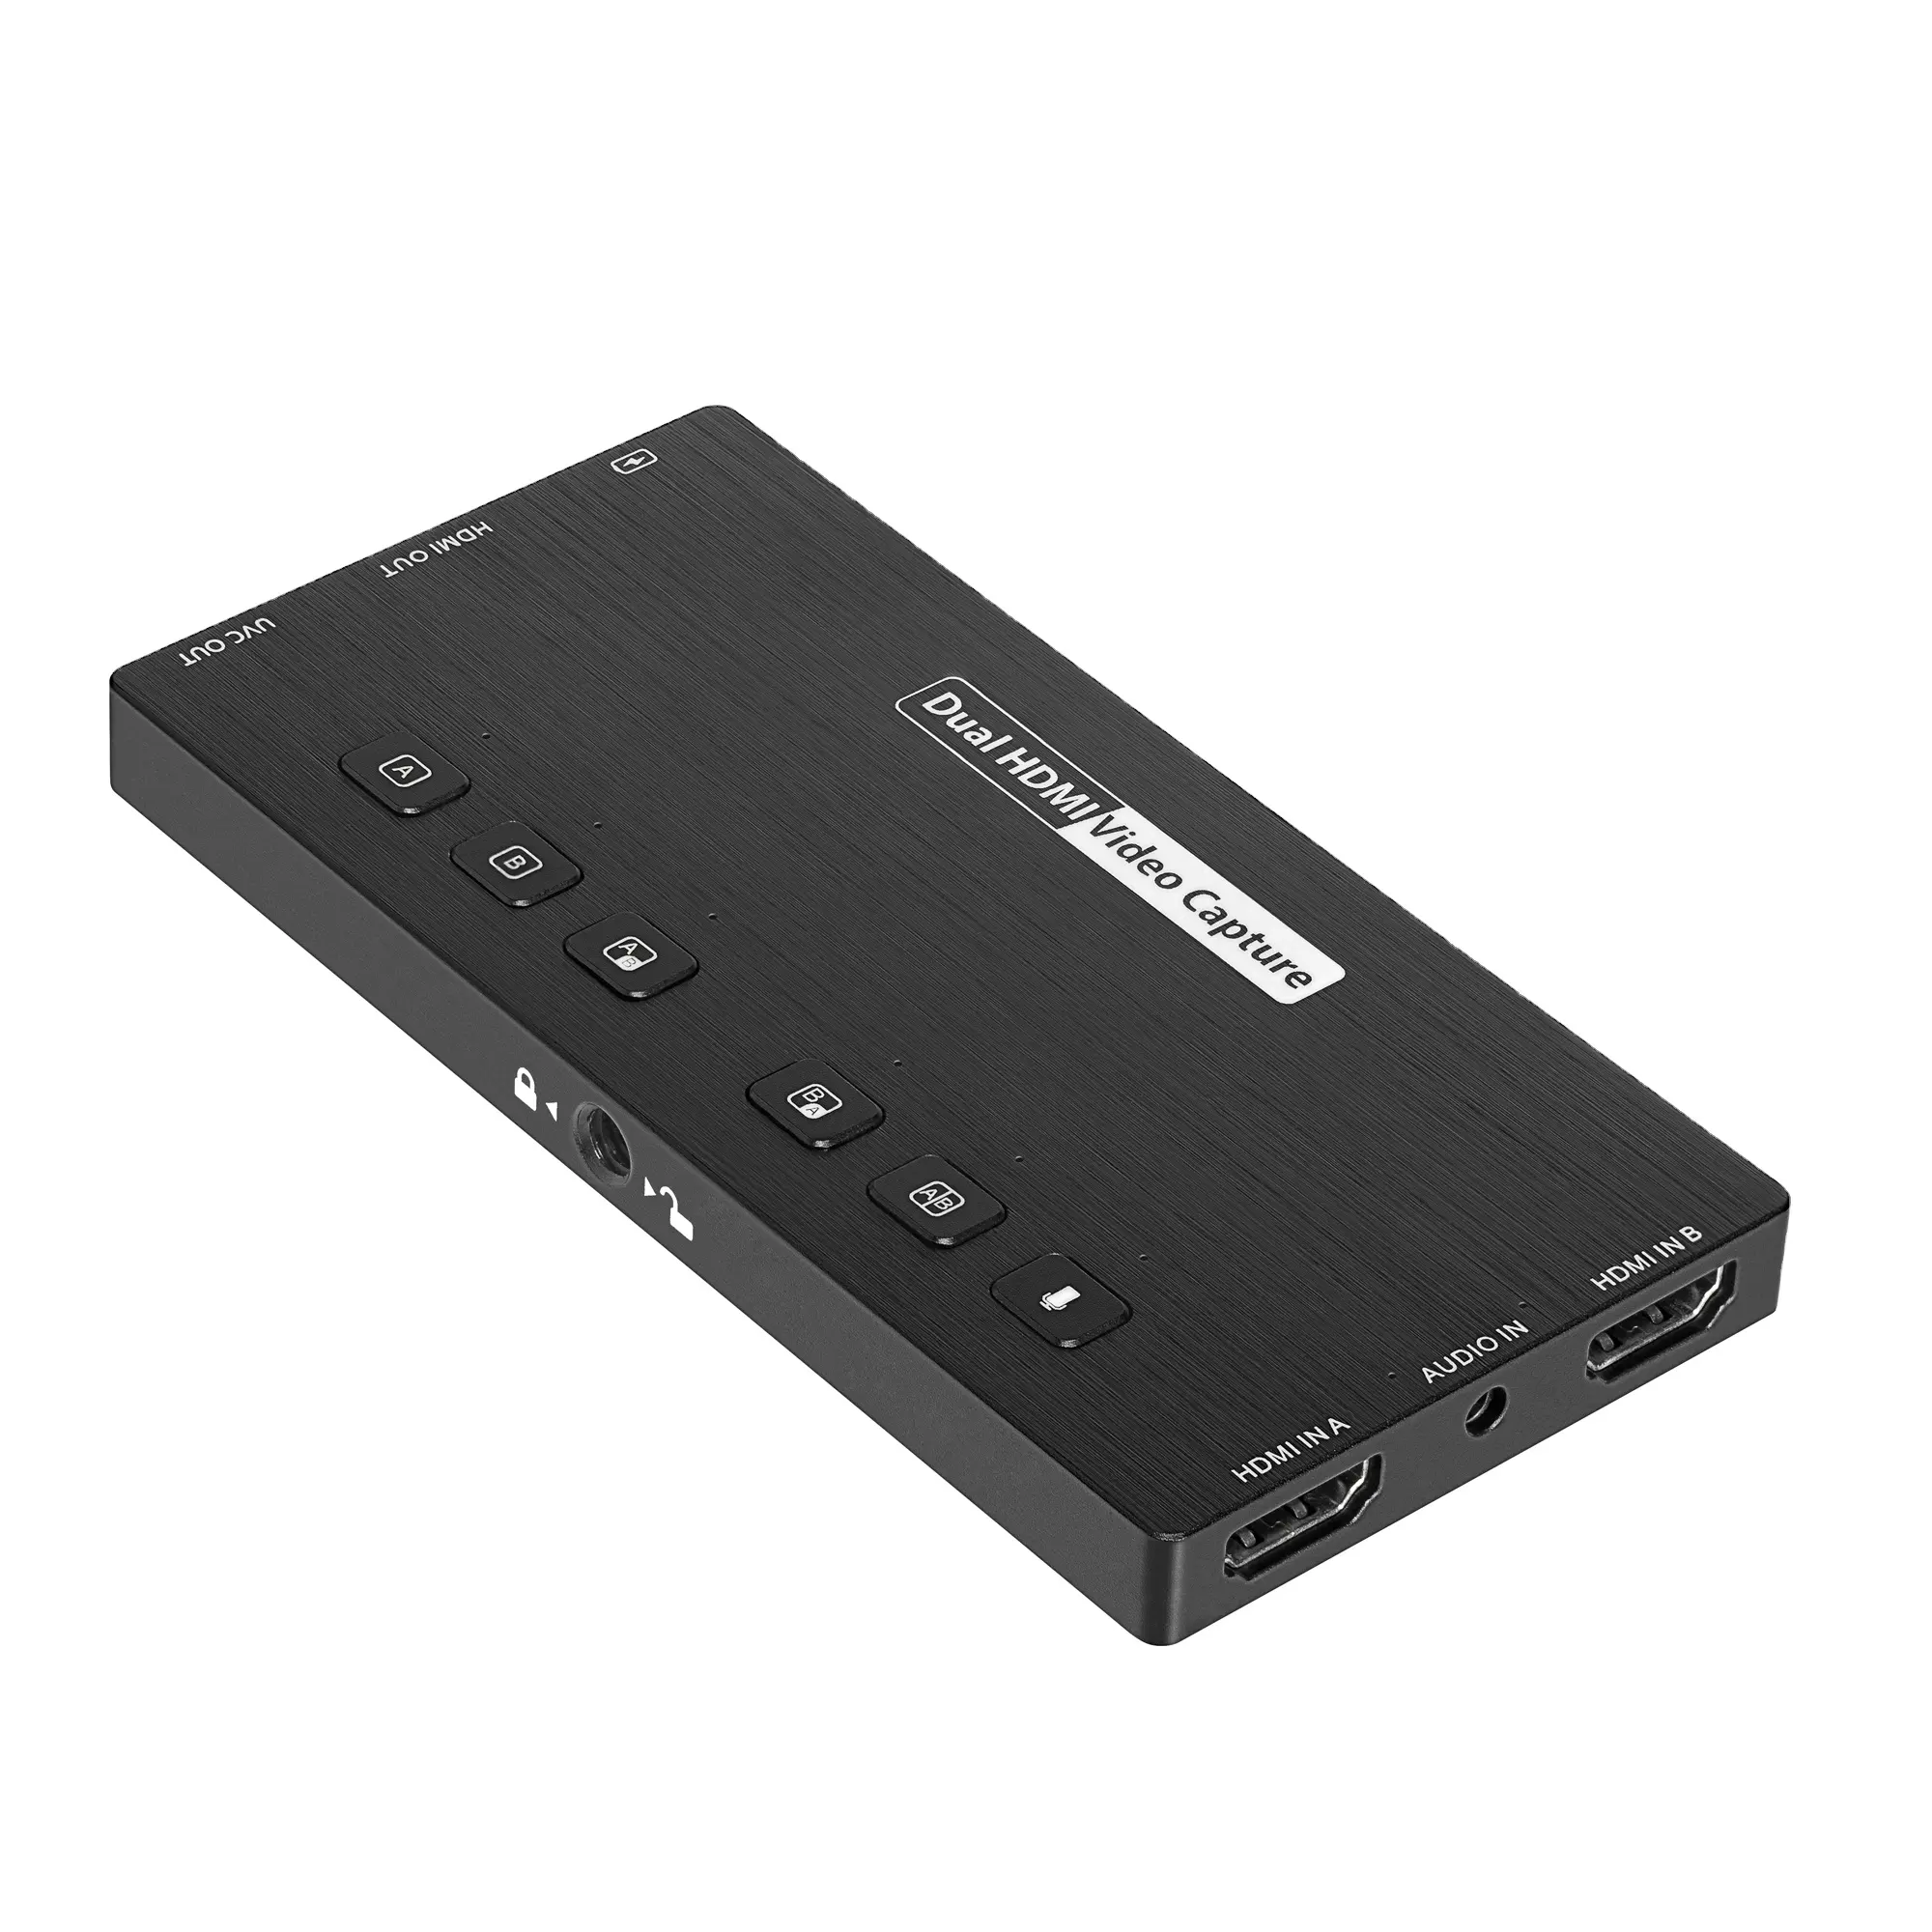 Powerful External Capture Devices Dual Hdmi-Compatible Capture Card For Multiple Use